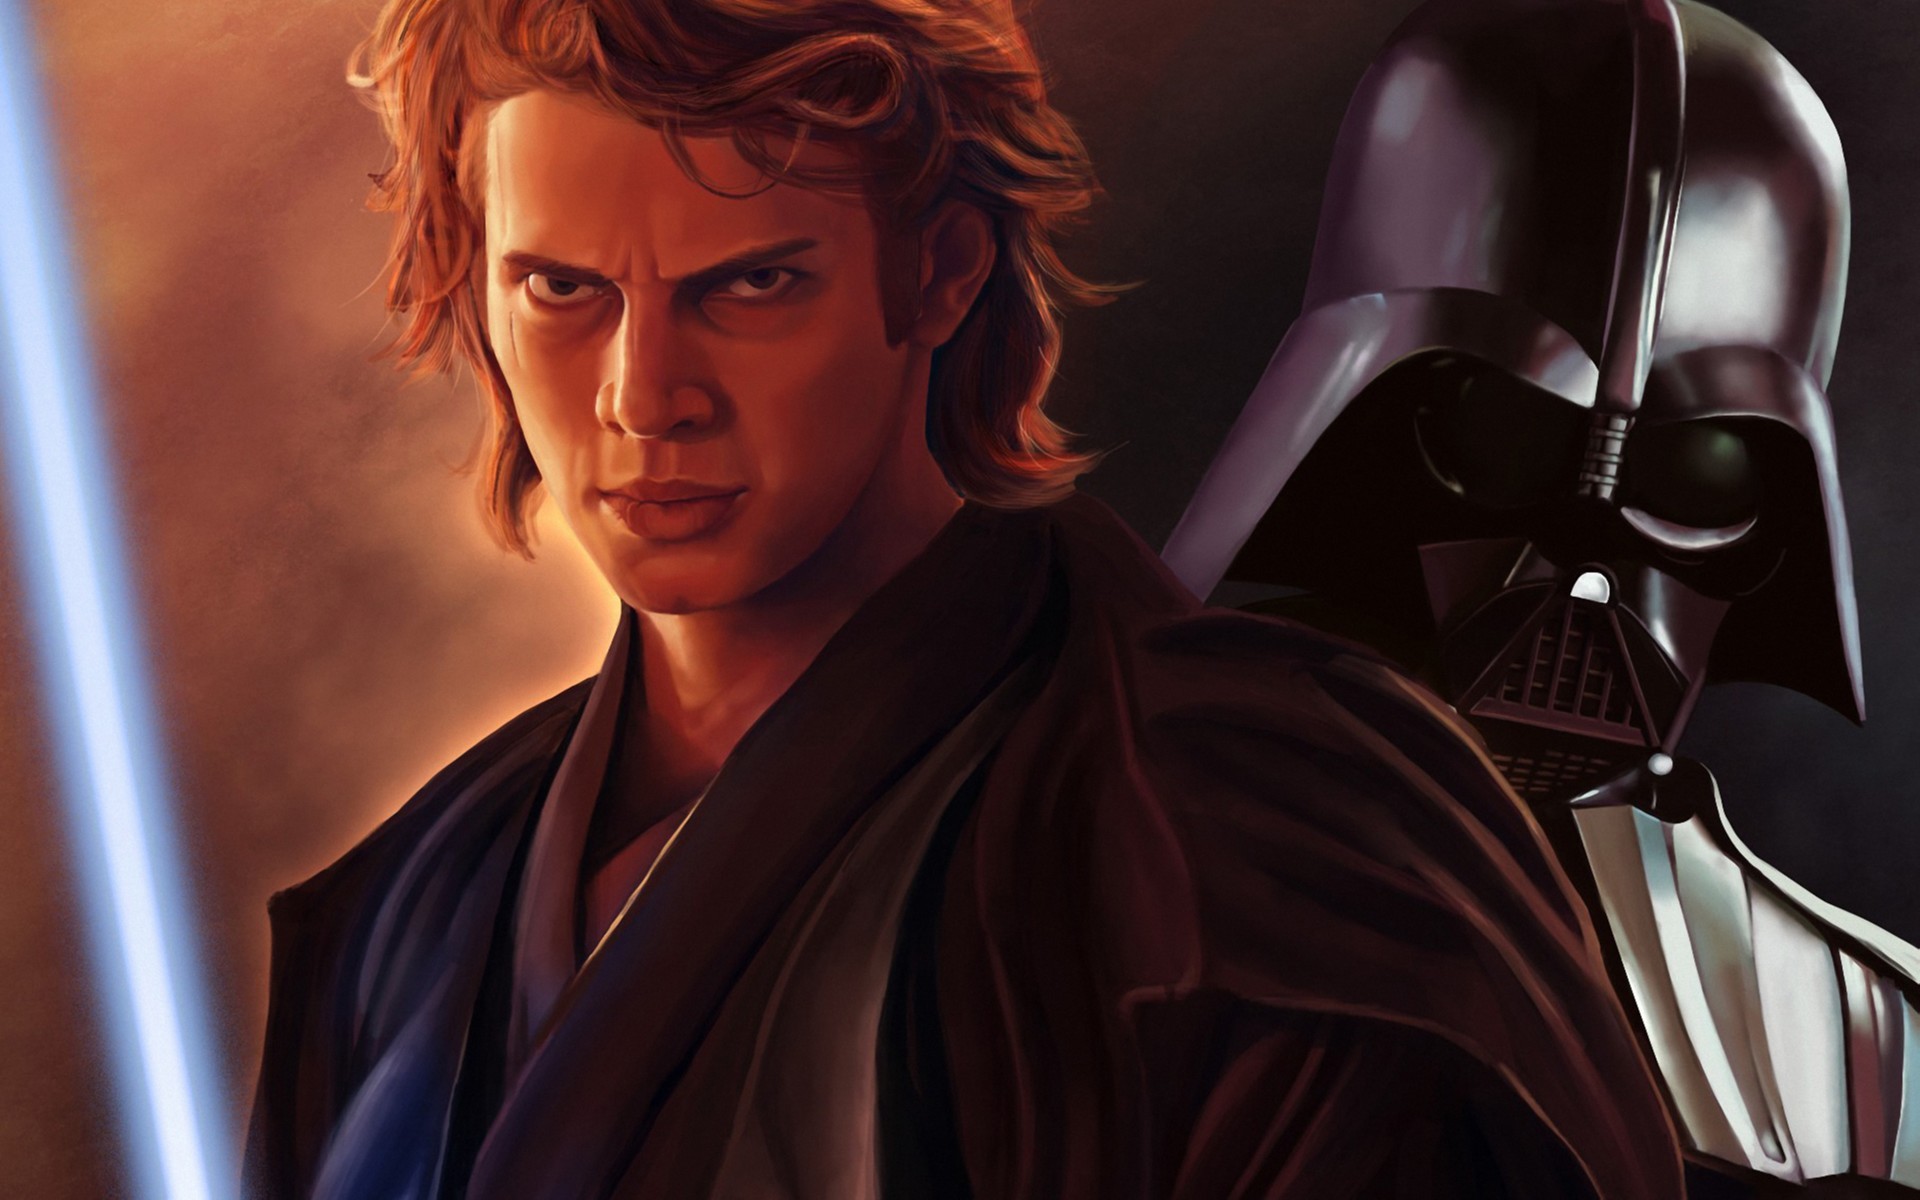 Darth Vader The Chosen One Who Changed History Of Star Wars